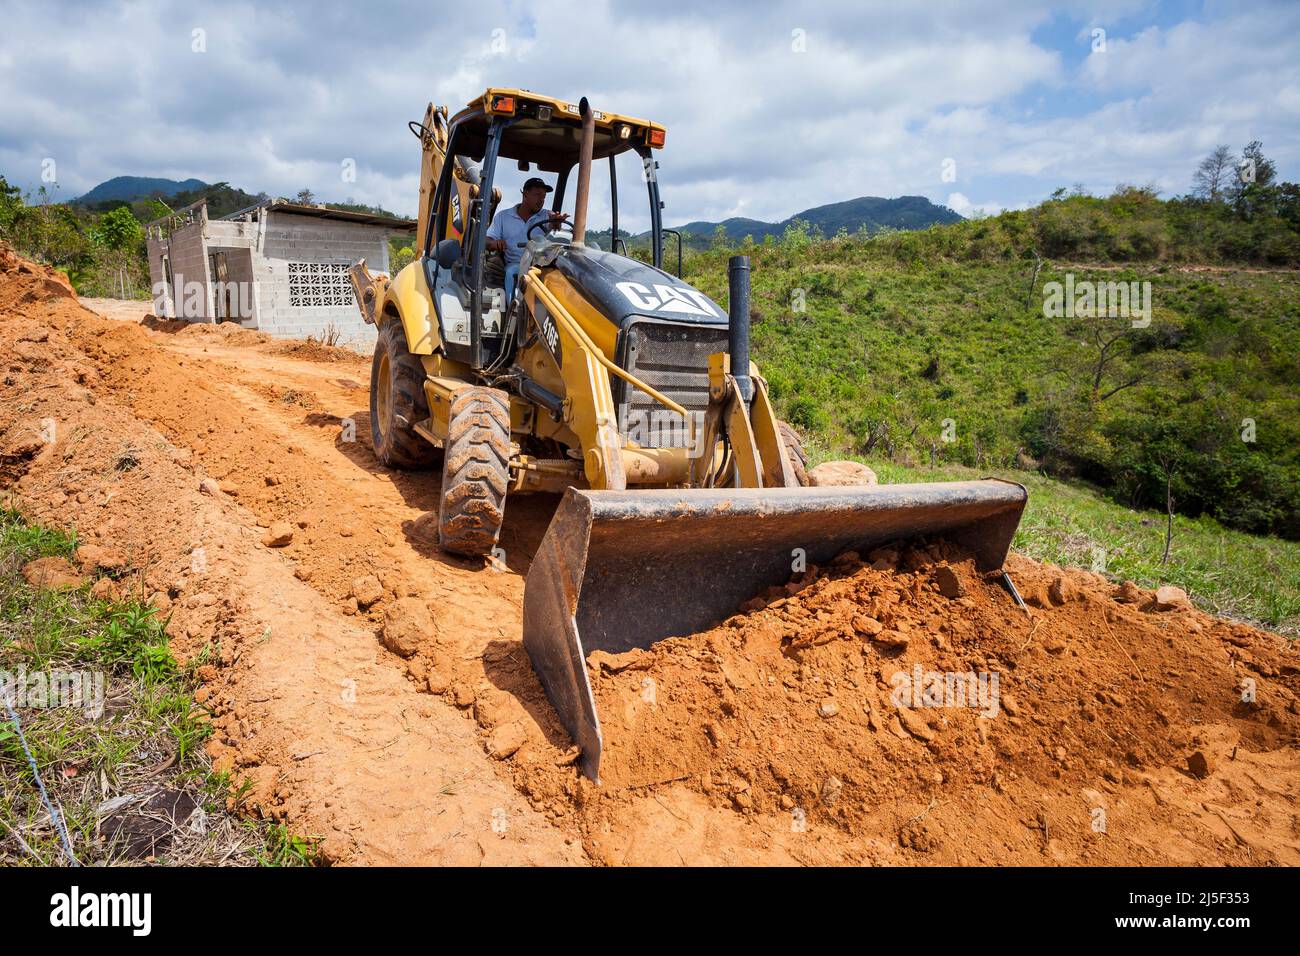 A tractor excavator operator is using the tractor excavator to shovel red earth in a construction site in the Cocle province, Republic of Panama. Stock Photo